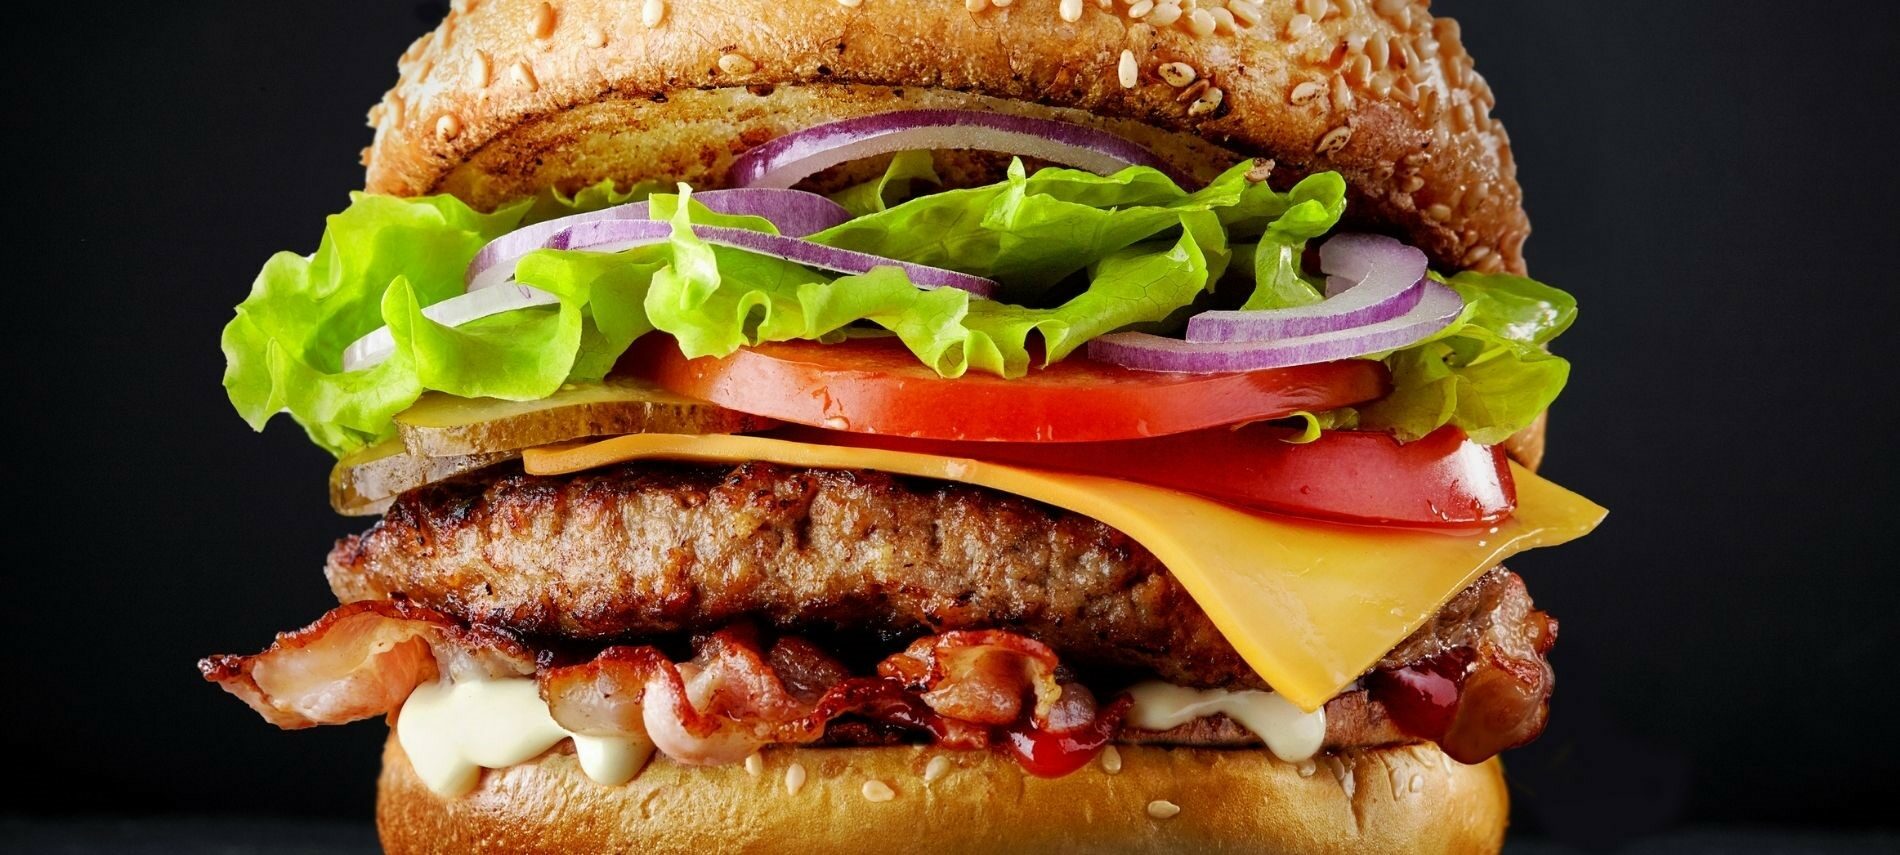 Closeup of a loaded burger—cheese, bacon, burger, tomato, lettuce, onion on a toasted bun